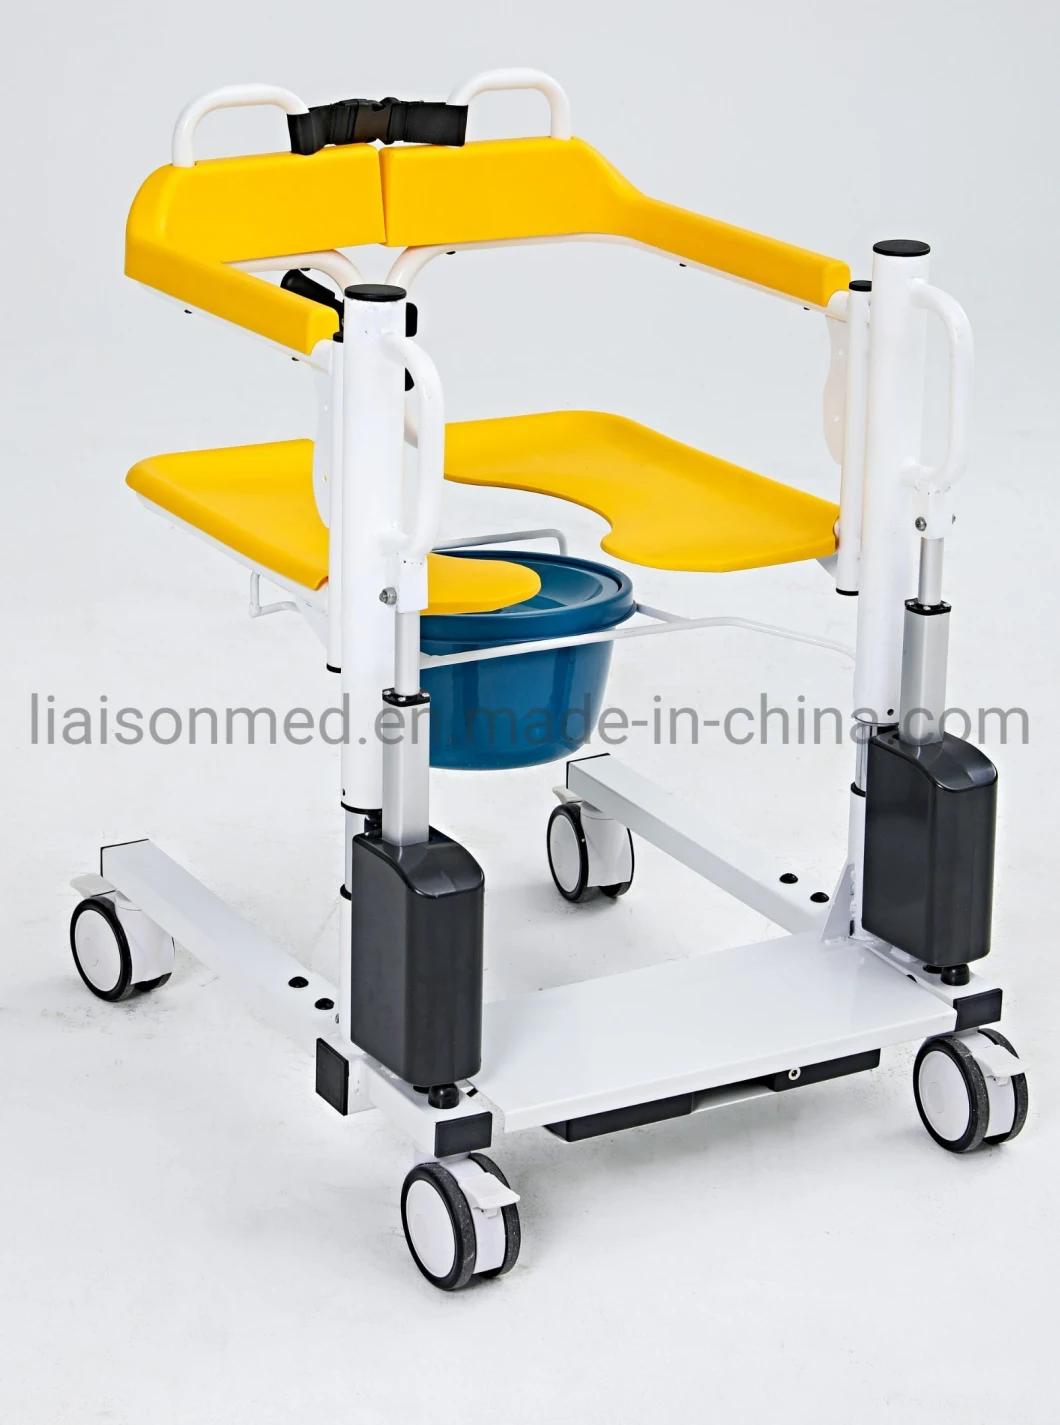 Mn-Ywj003 Stainless Steel Folding Evacuation Stretcher Stair Chair for Patient Transfer